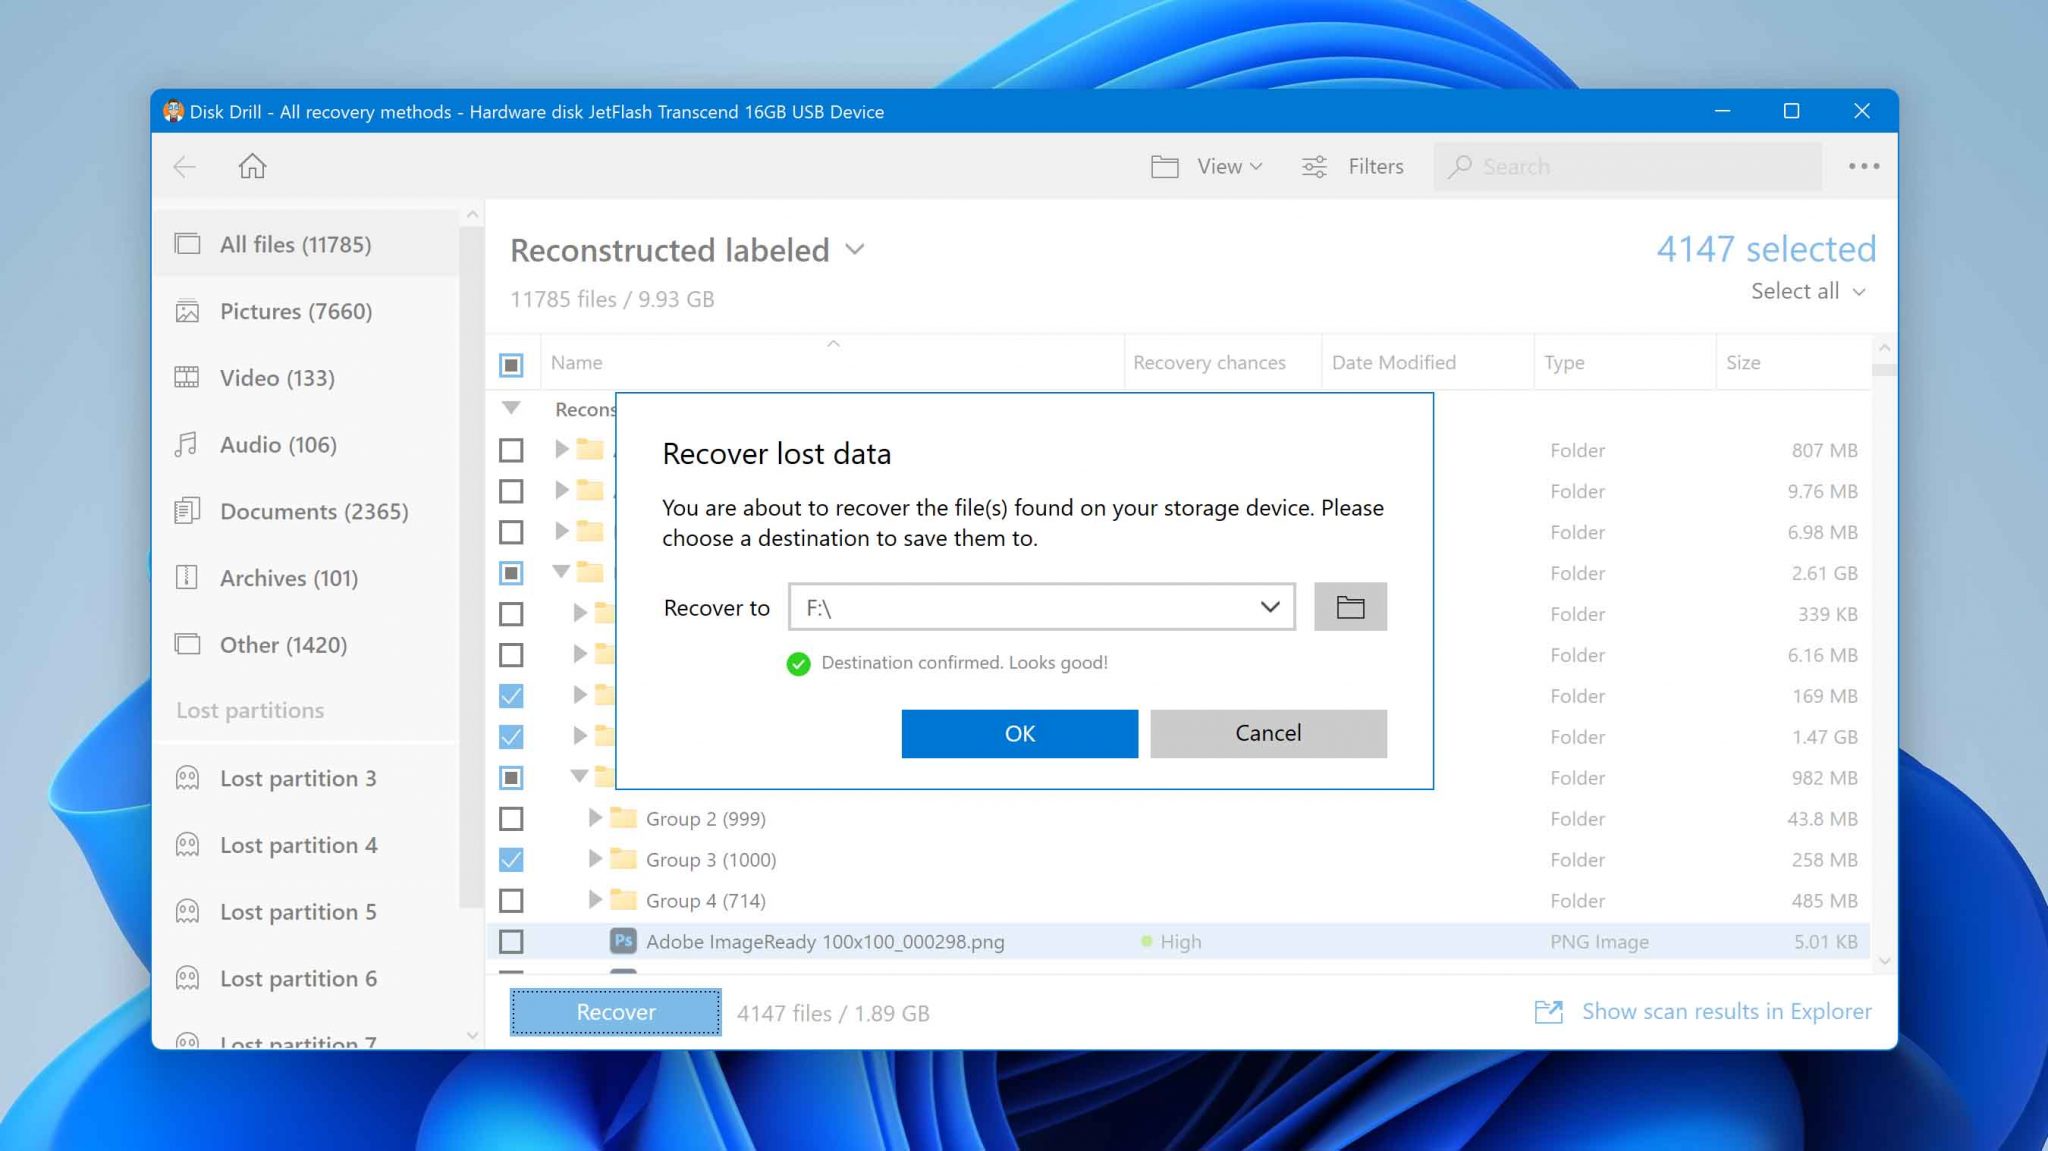 Choose where to save the recovered files.